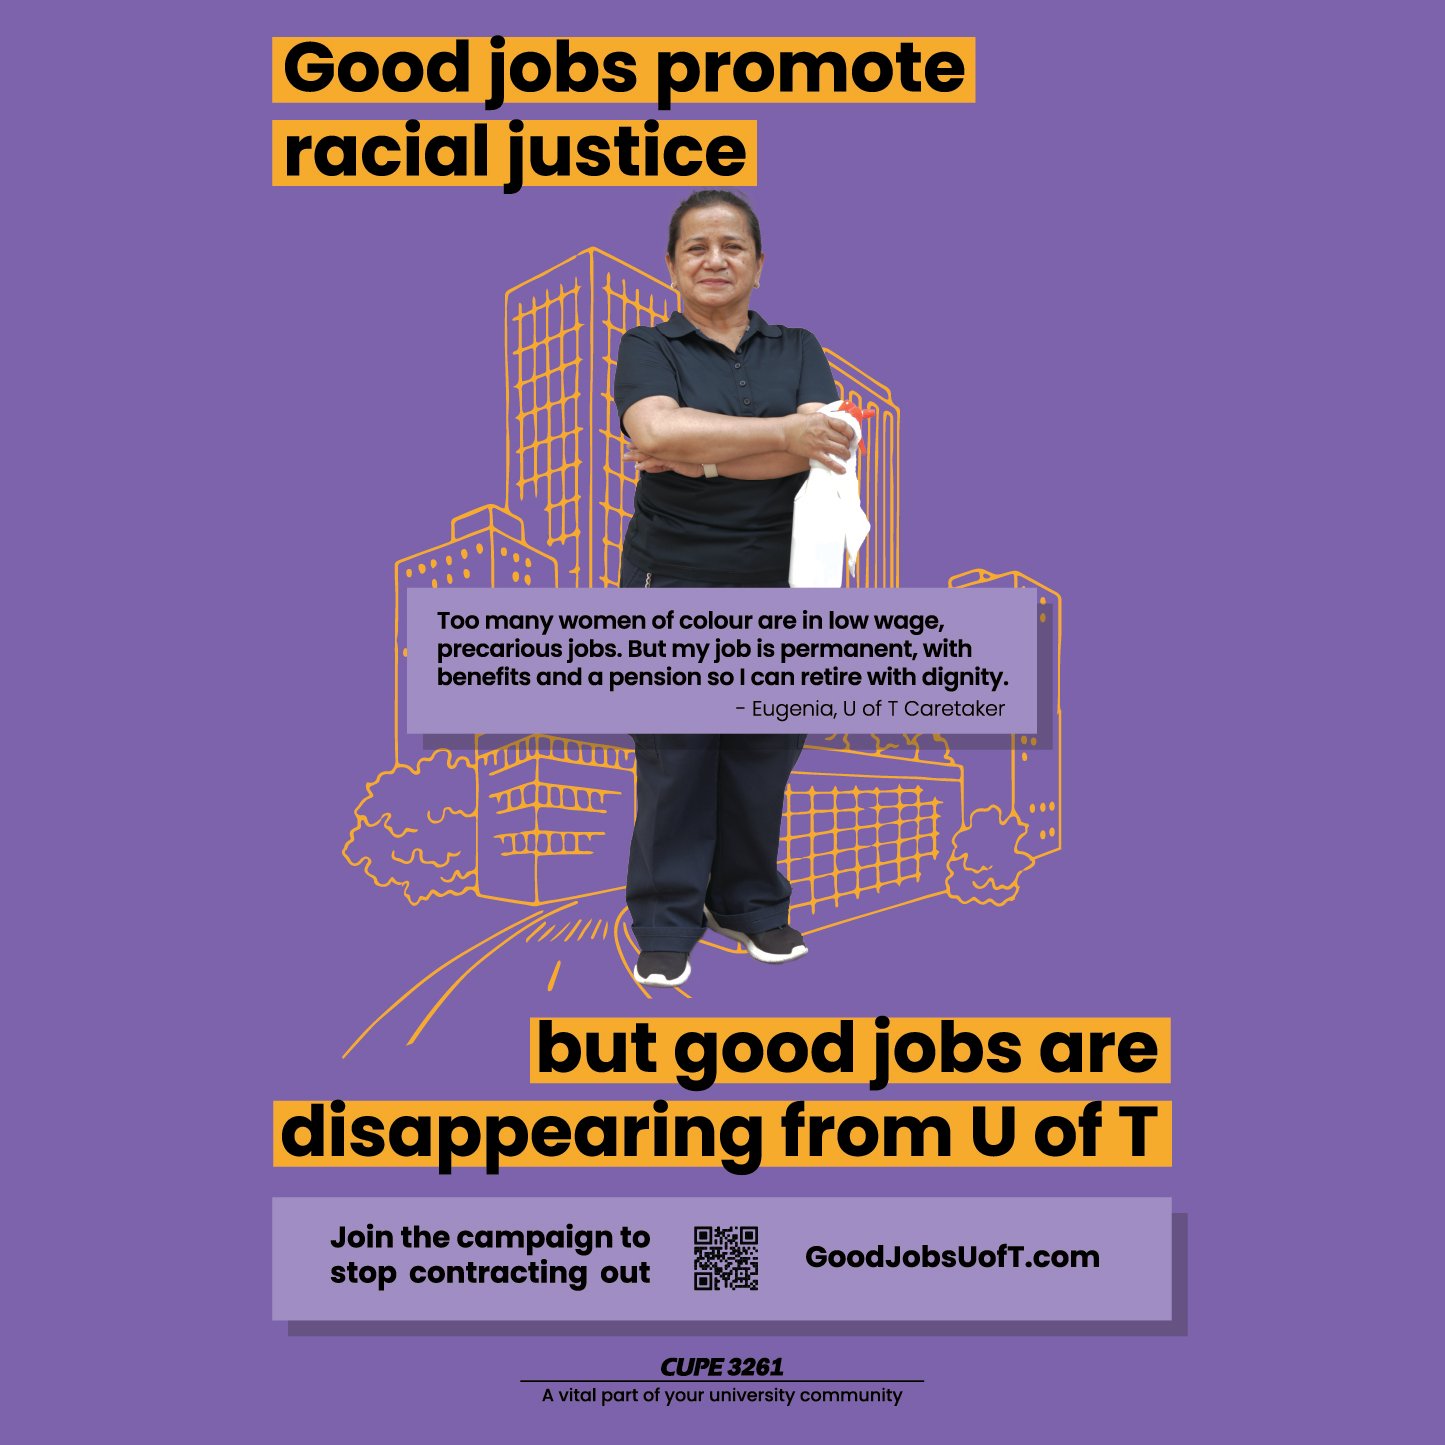 Good jobs promote racial justice but good jobs are disappearing from UofT. Join the campaign to stop contracting out Too many women of colour are in low wage, precarious jobs. But my job is permanent, with benefits and a pension so I can retires with dignity.